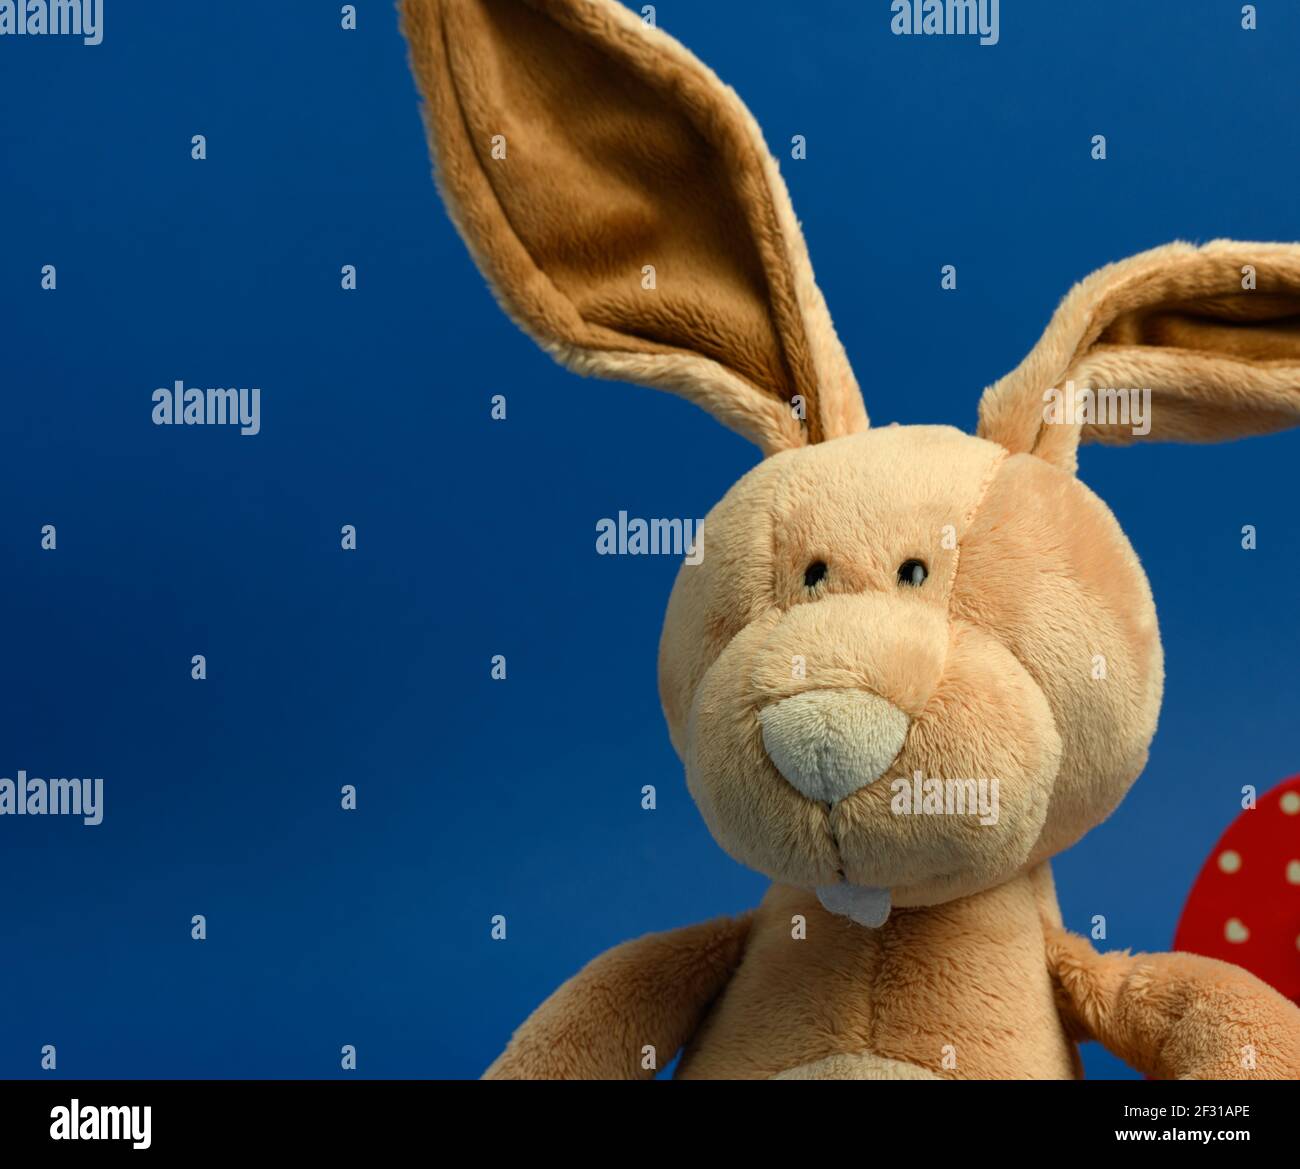 Funny beige plush rabbit with big ears and funny face on a blue background Stock Photo